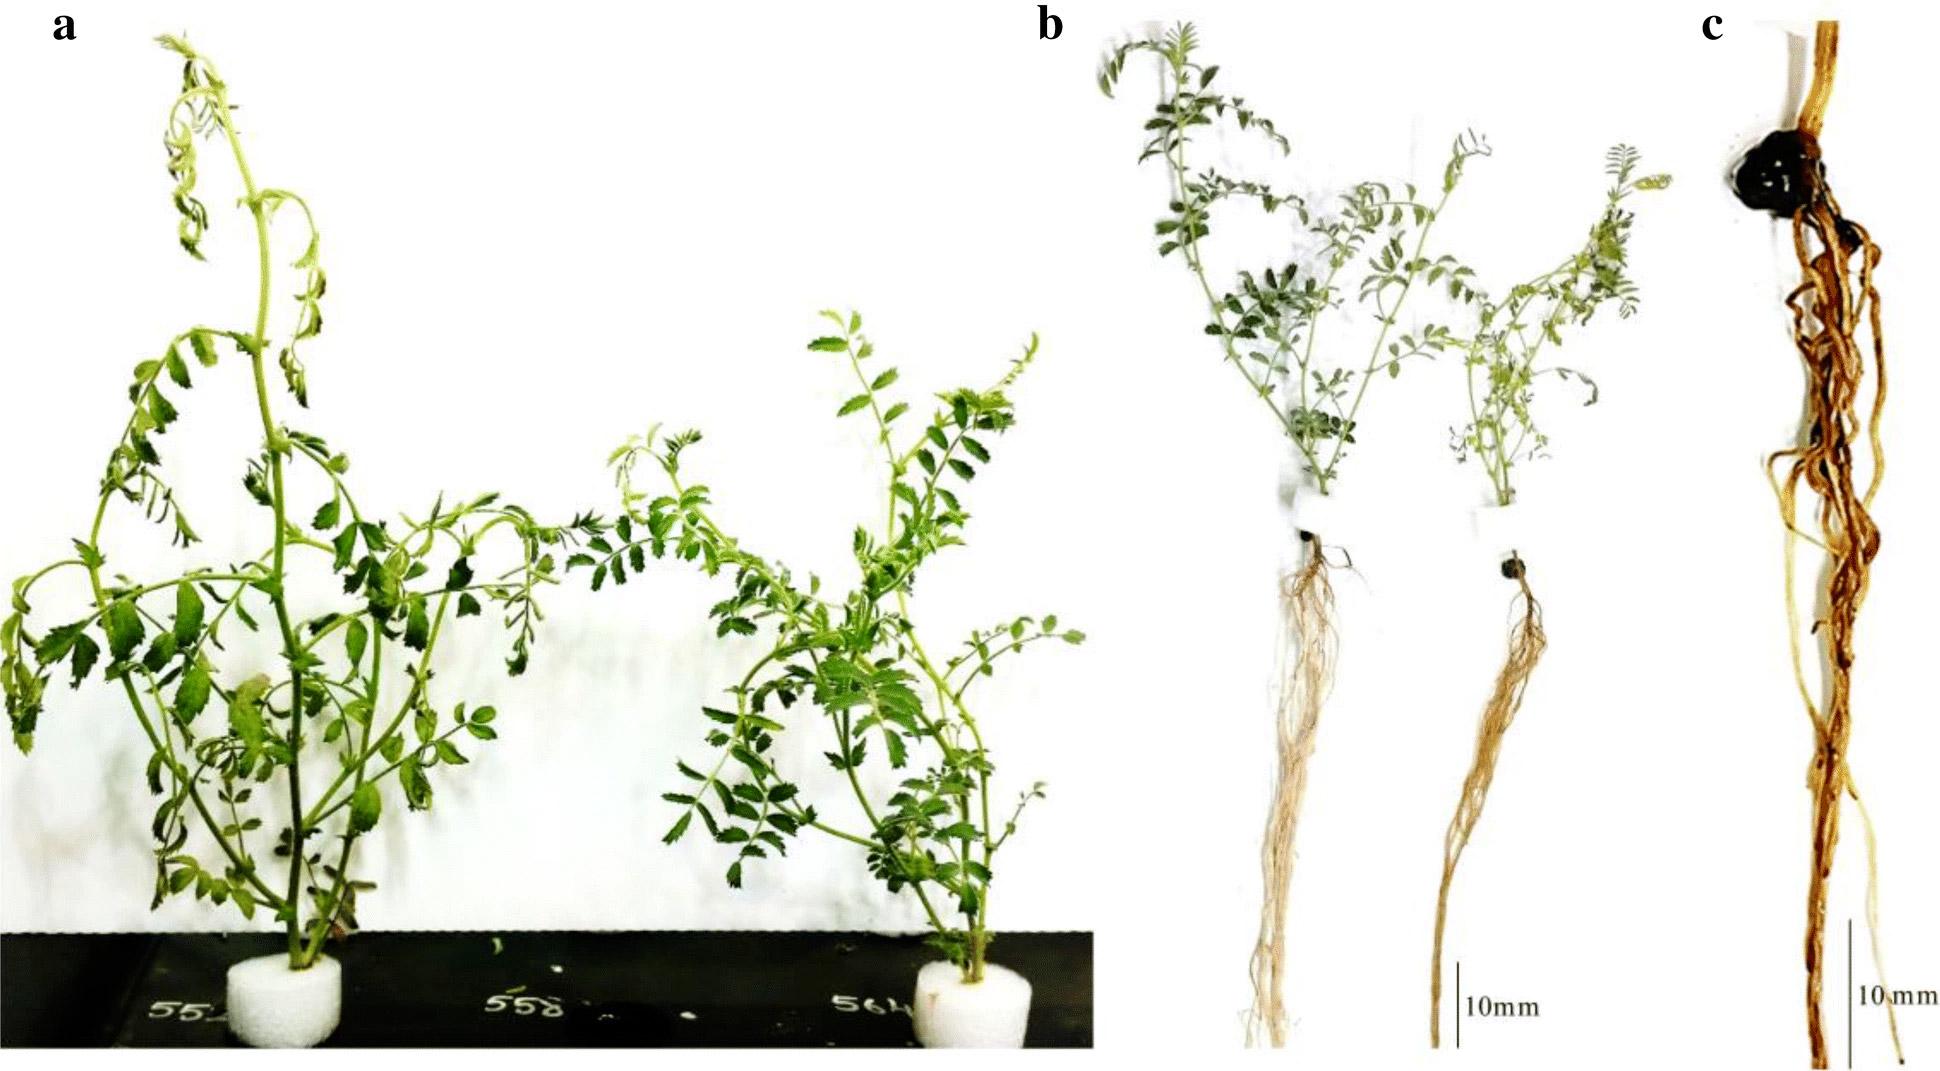 Phenotypic variation for PRR resistance in chickpea grown in hydroponics at 9 days after inoculation with P. medicaginis zoospores. a Wilting symptoms (04067-81-2-1-1 on left, Rupali on right) chickpea genotypes grown in hydroponics at 9 days after inoculation with P. medicaginis zoospores. b Root symptoms (04067-81-2-1-1 on left, Rupali on right). c Lateral and tap root death in Rupali